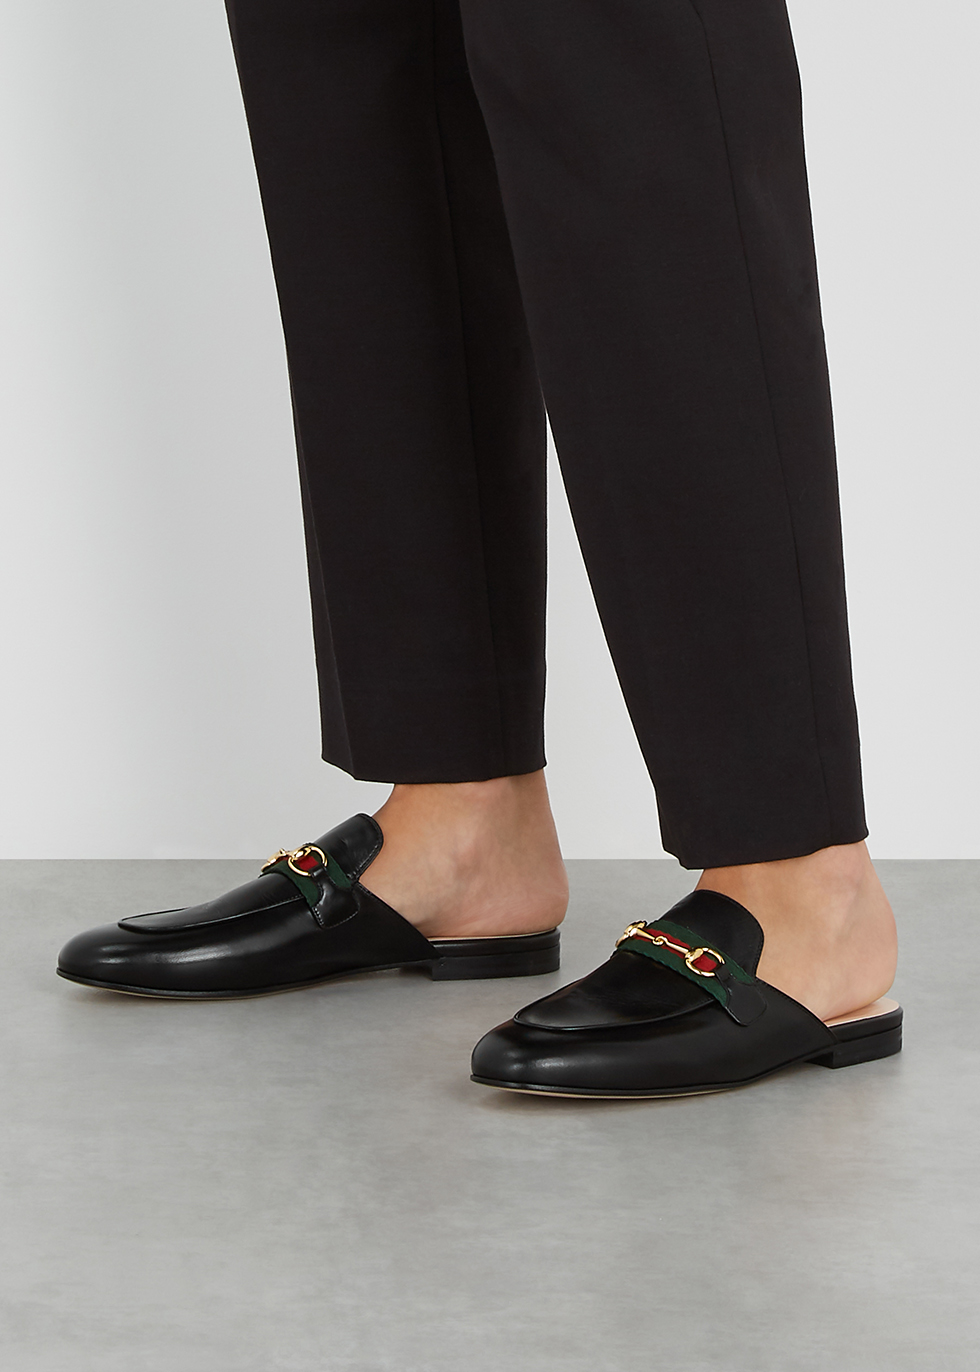 gucci princetown leather backless loafers